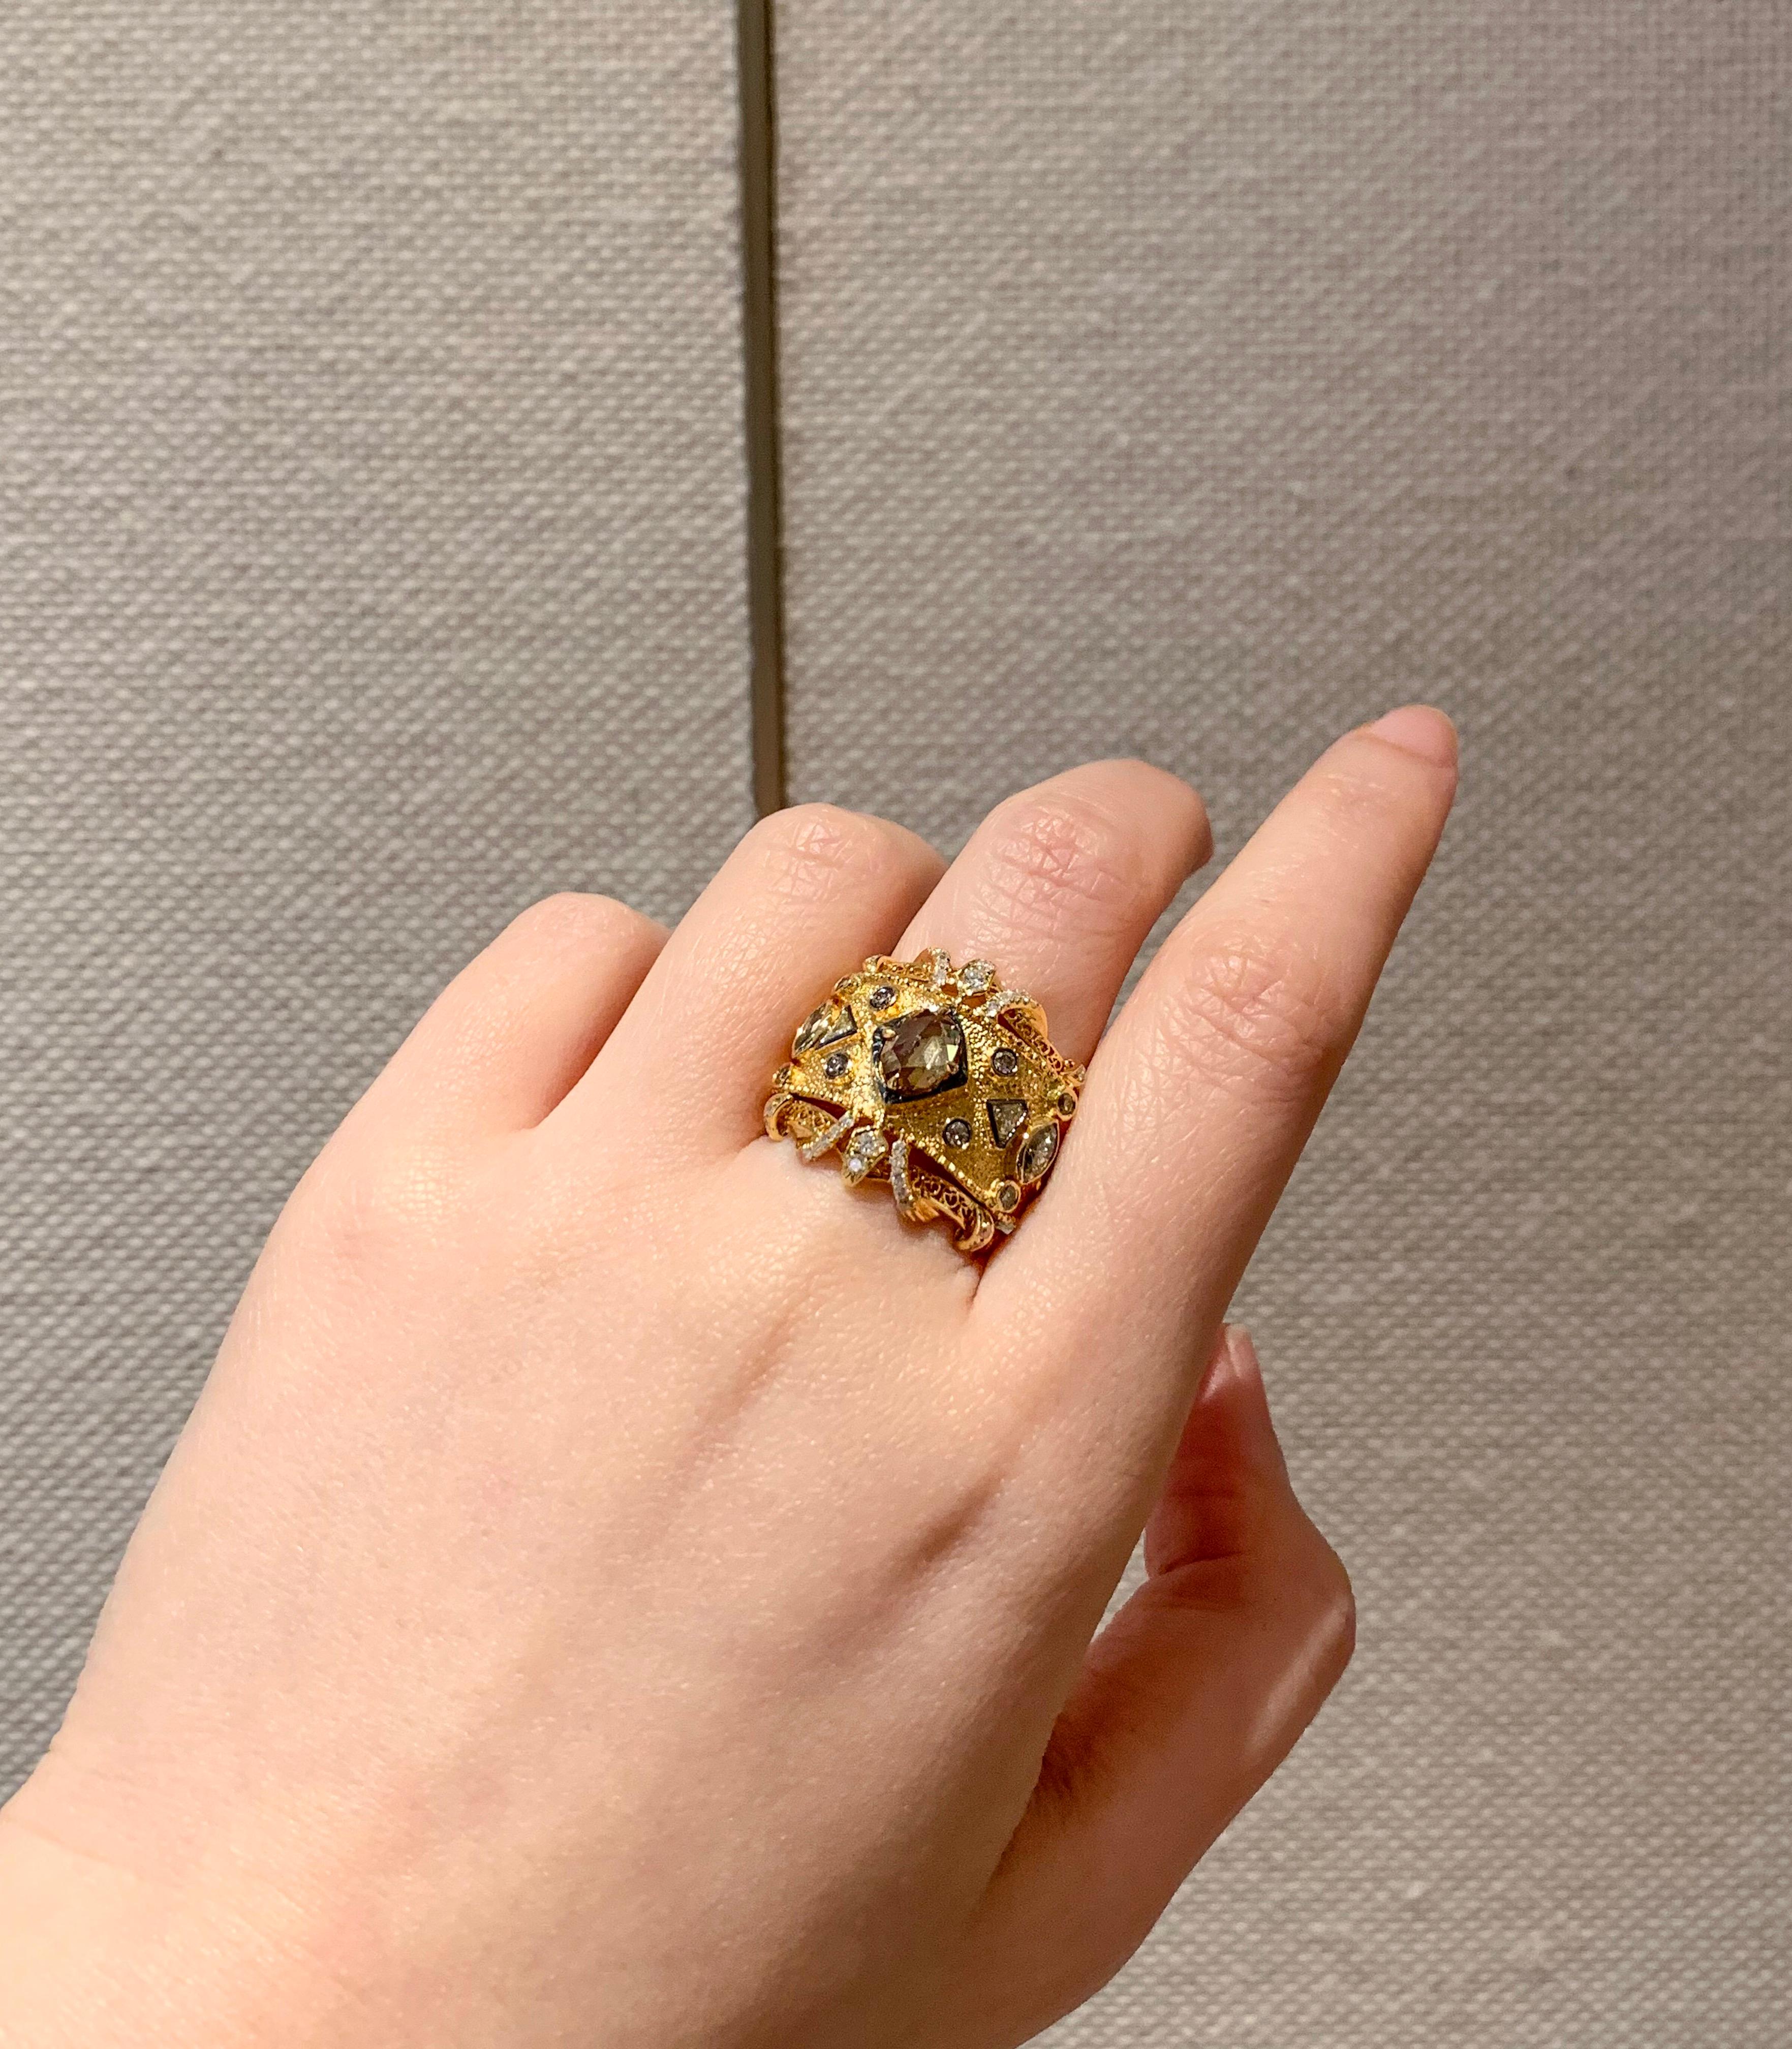 While taking inspiration from the grandeurs of the Baroque style and 17th Century jewelry, the design behind this 18 karat yellow gold band ring by Dilys’ is simplified for modern-day wear. Easy to dress up or dress down with, the ring’s neutral